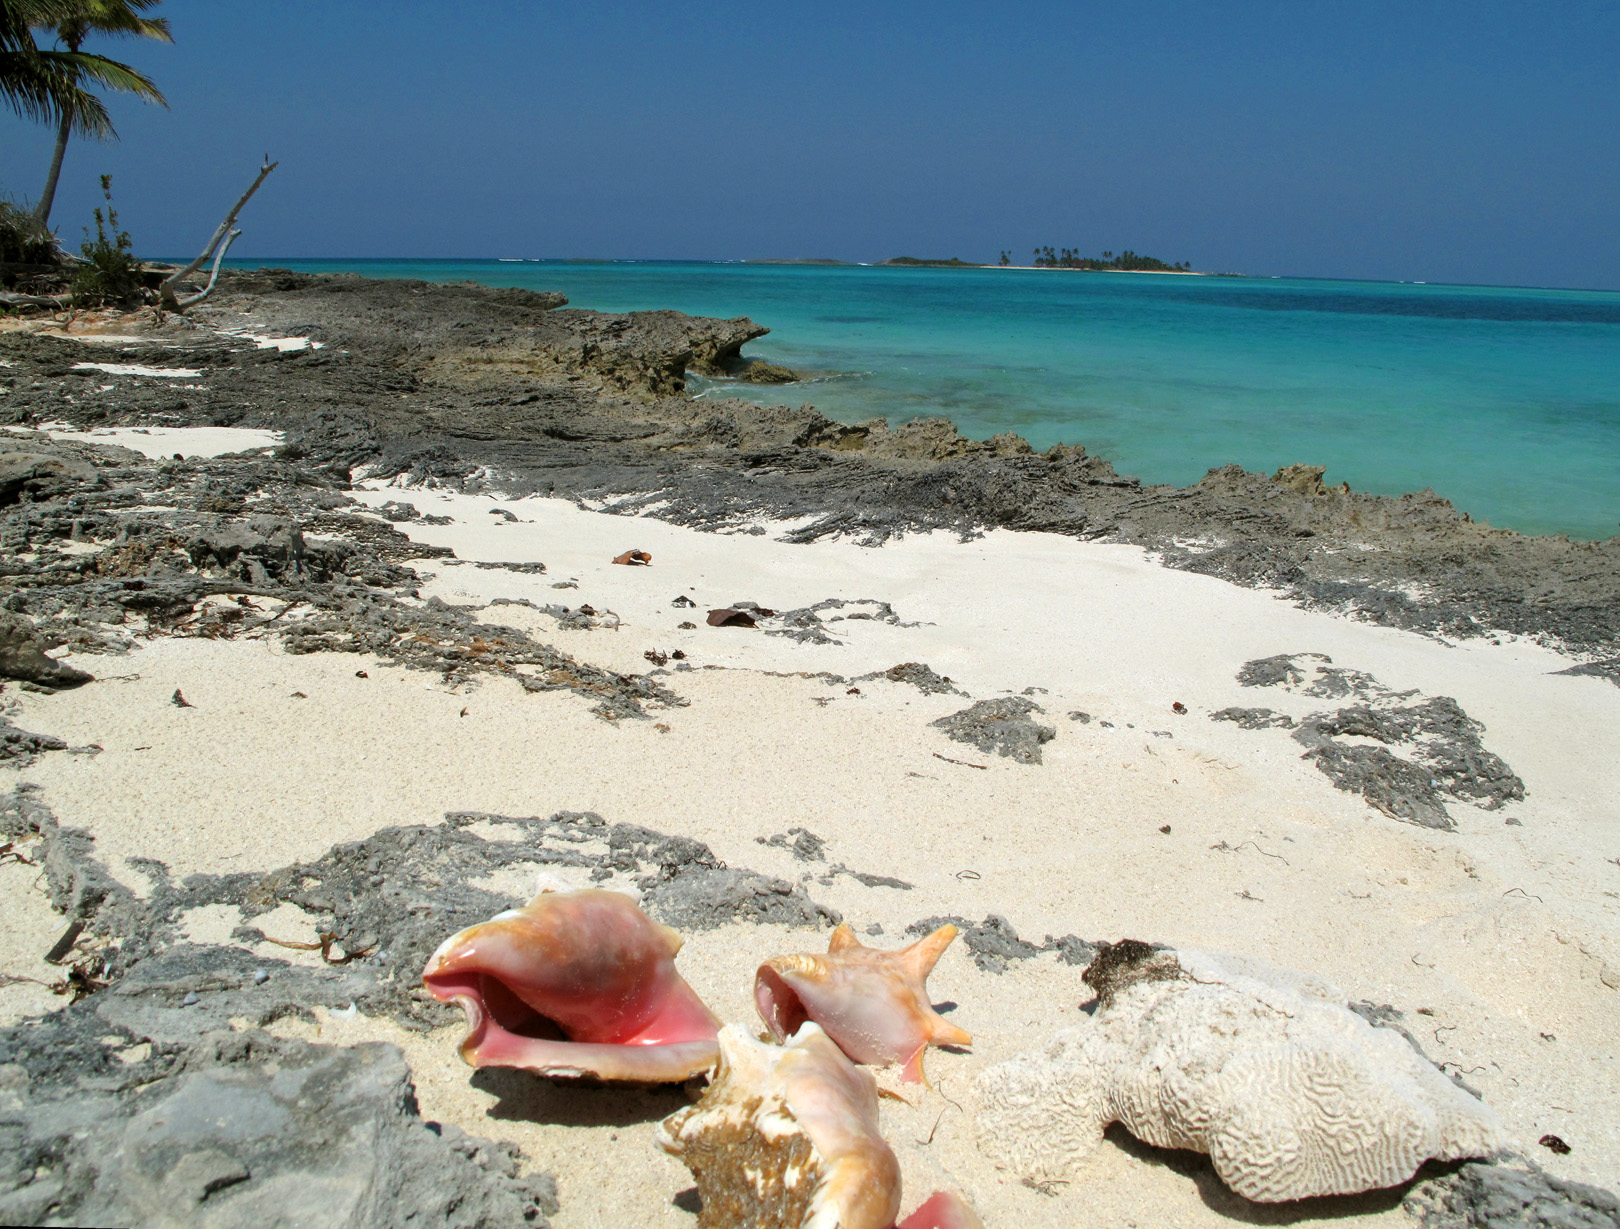 Conch Shells at Gillam Bay, Green Turtle Cay